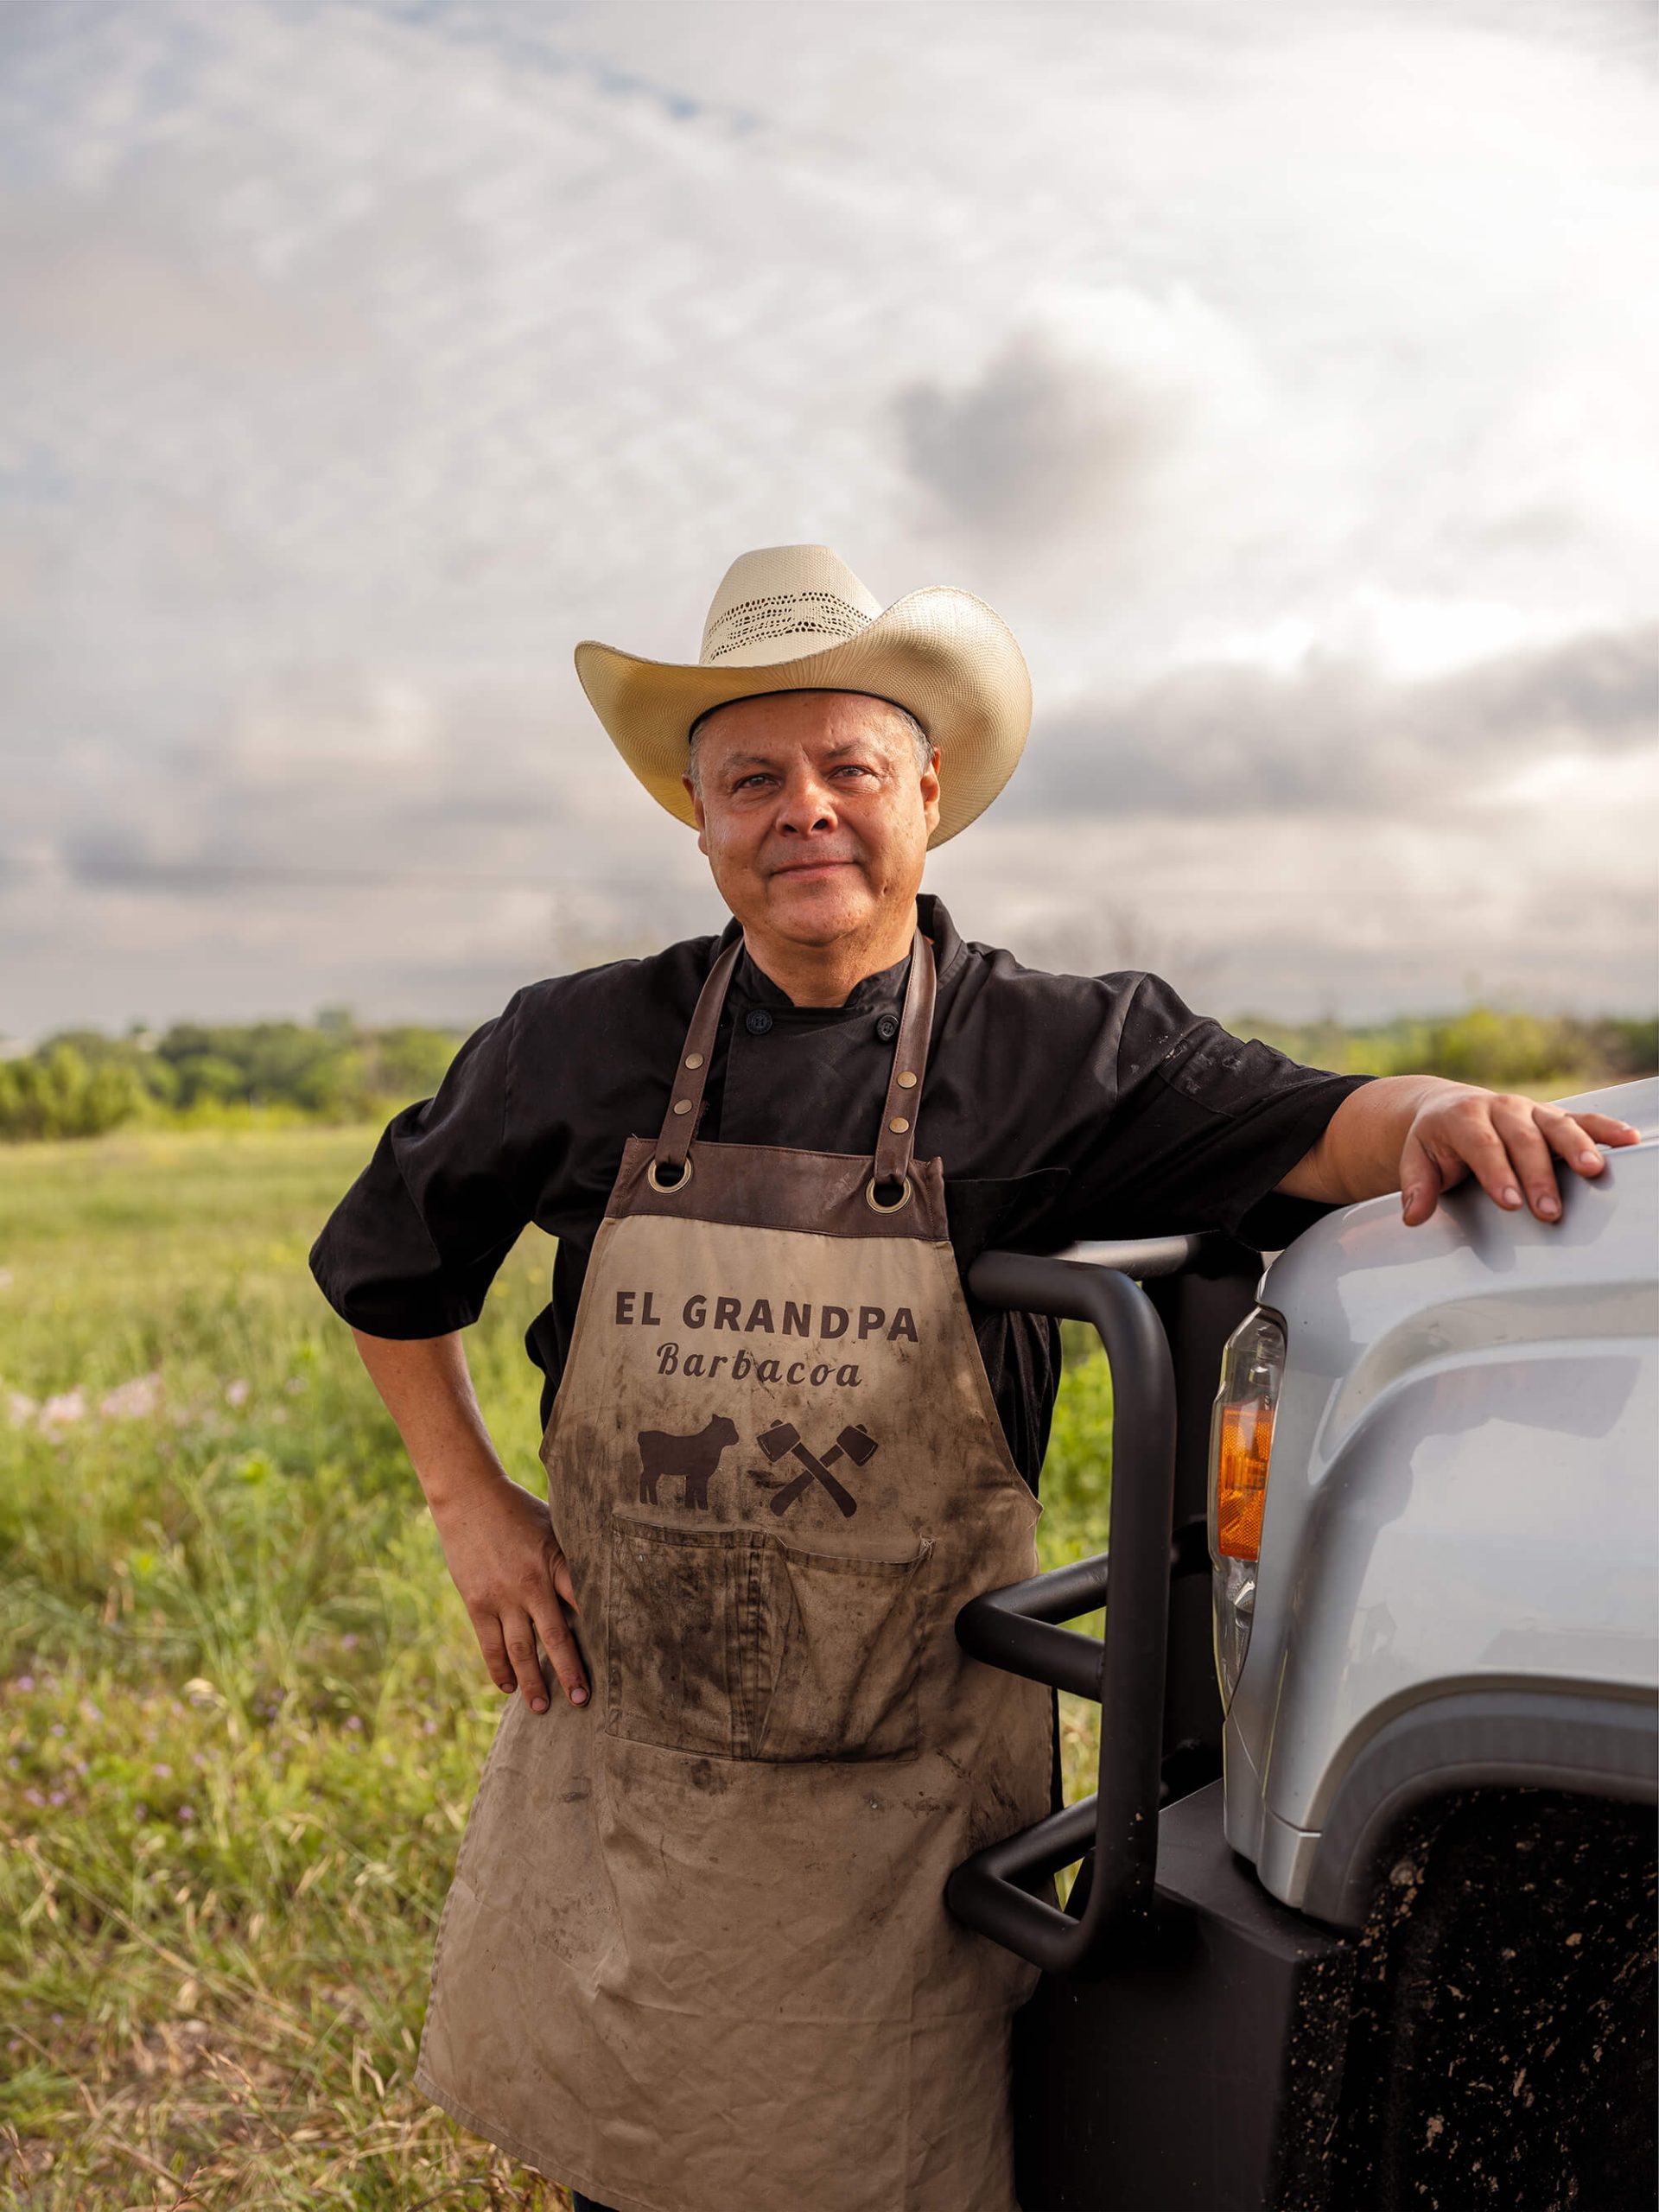 A man in a cowboy hat and apron stands in a field beside a truck